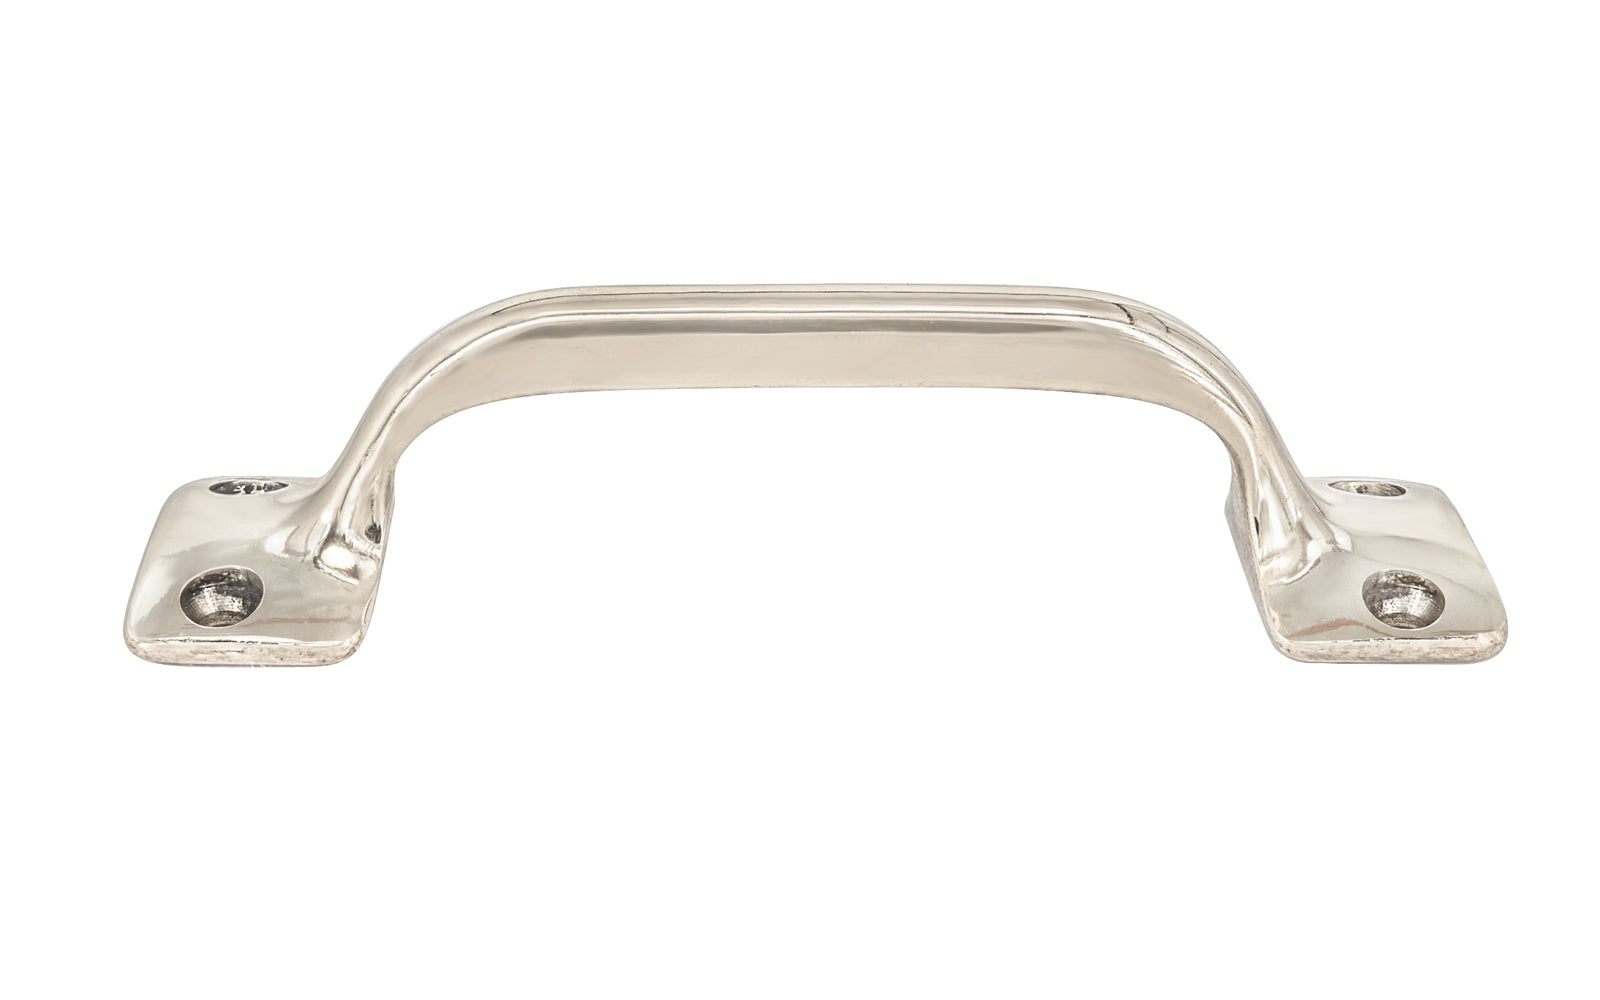 Vintage-style Hardware · Classic Solid Brass Handle Pull ~ 3-1/2" On Centers. Versatile handle is great for sash windows, cabinets, drawers, file cabinets. Arts & Crafts handle pull. Polished Nickel Finish.